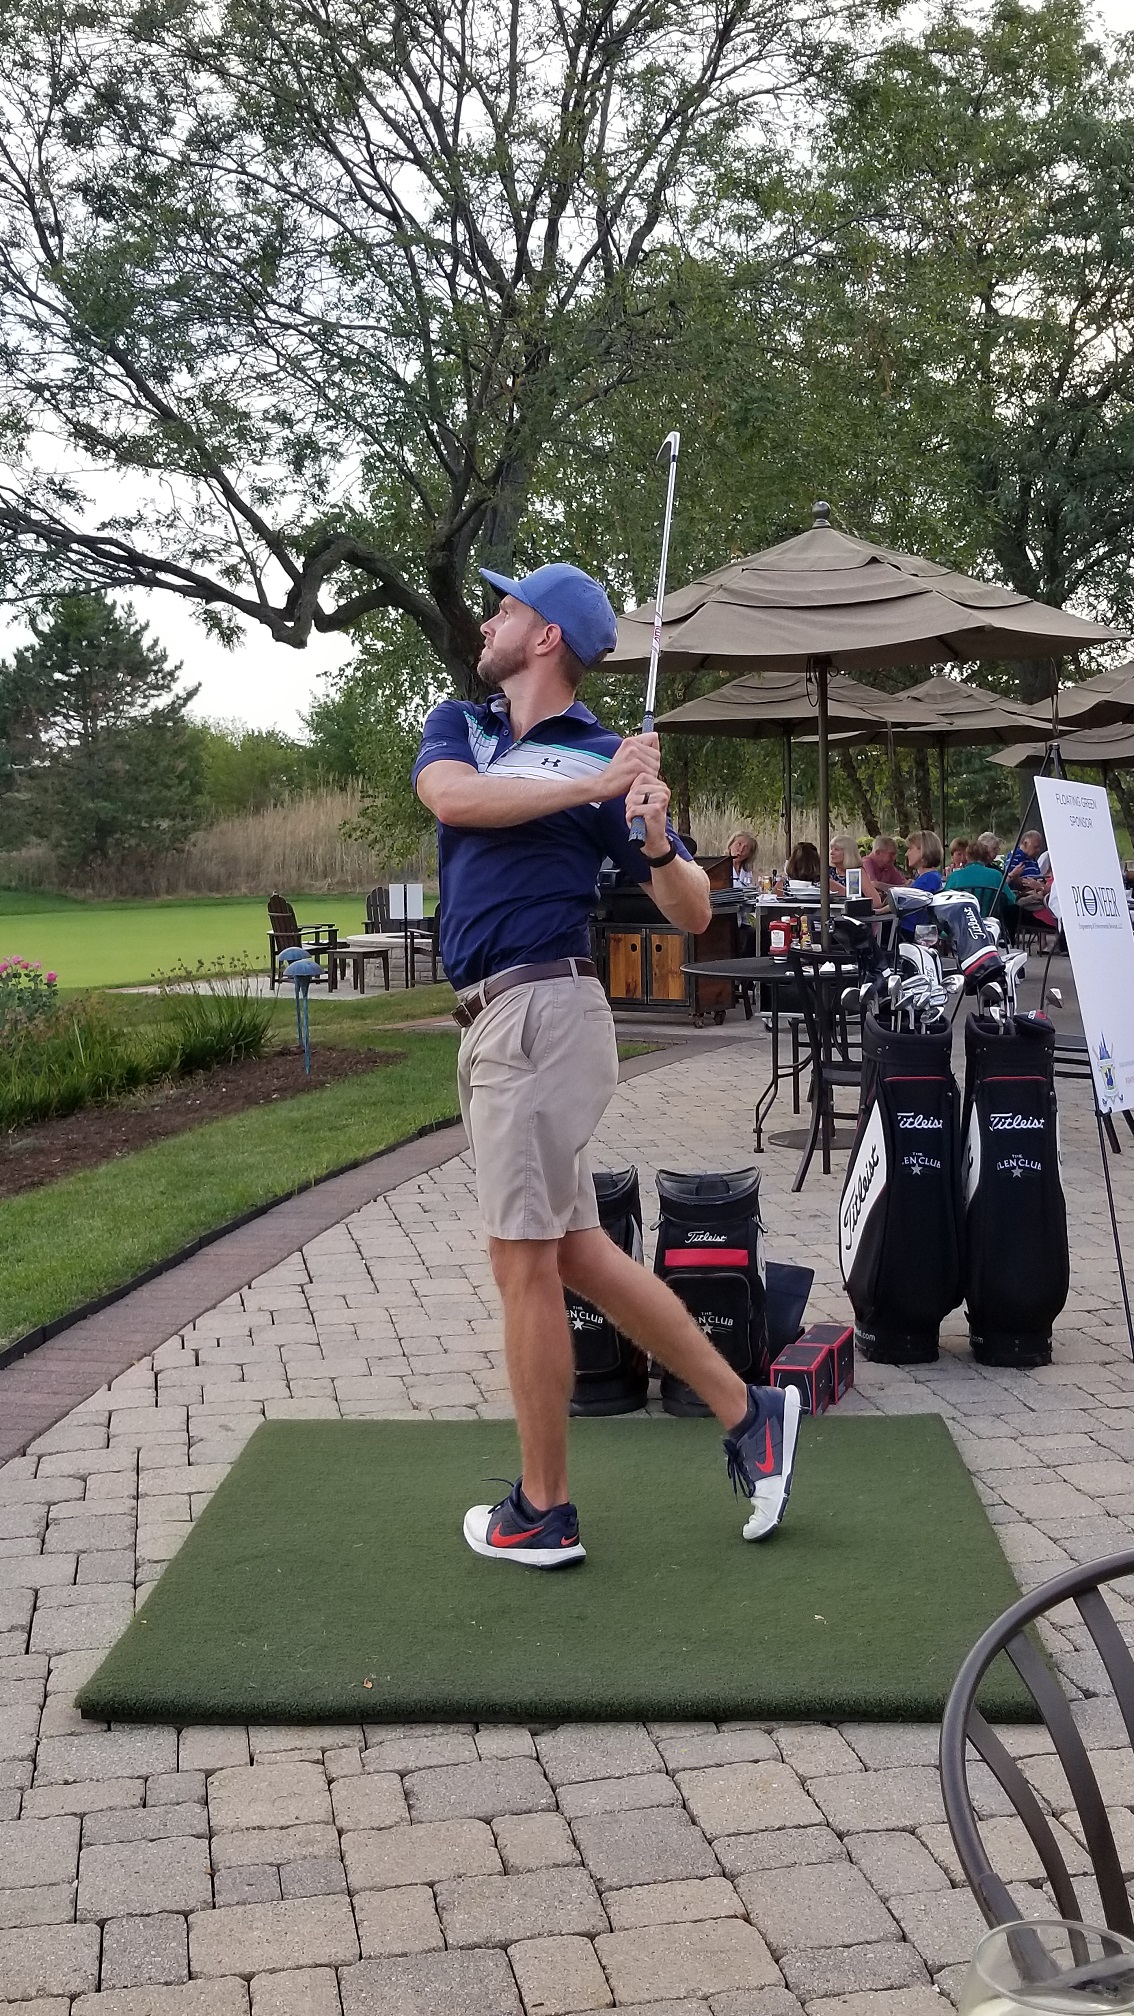 Jeff Gurrister practices his swing during the 4th Annual Real Estate to the Rescue Golf Outing charity tournament, for the Save-A-Pet Foundation.